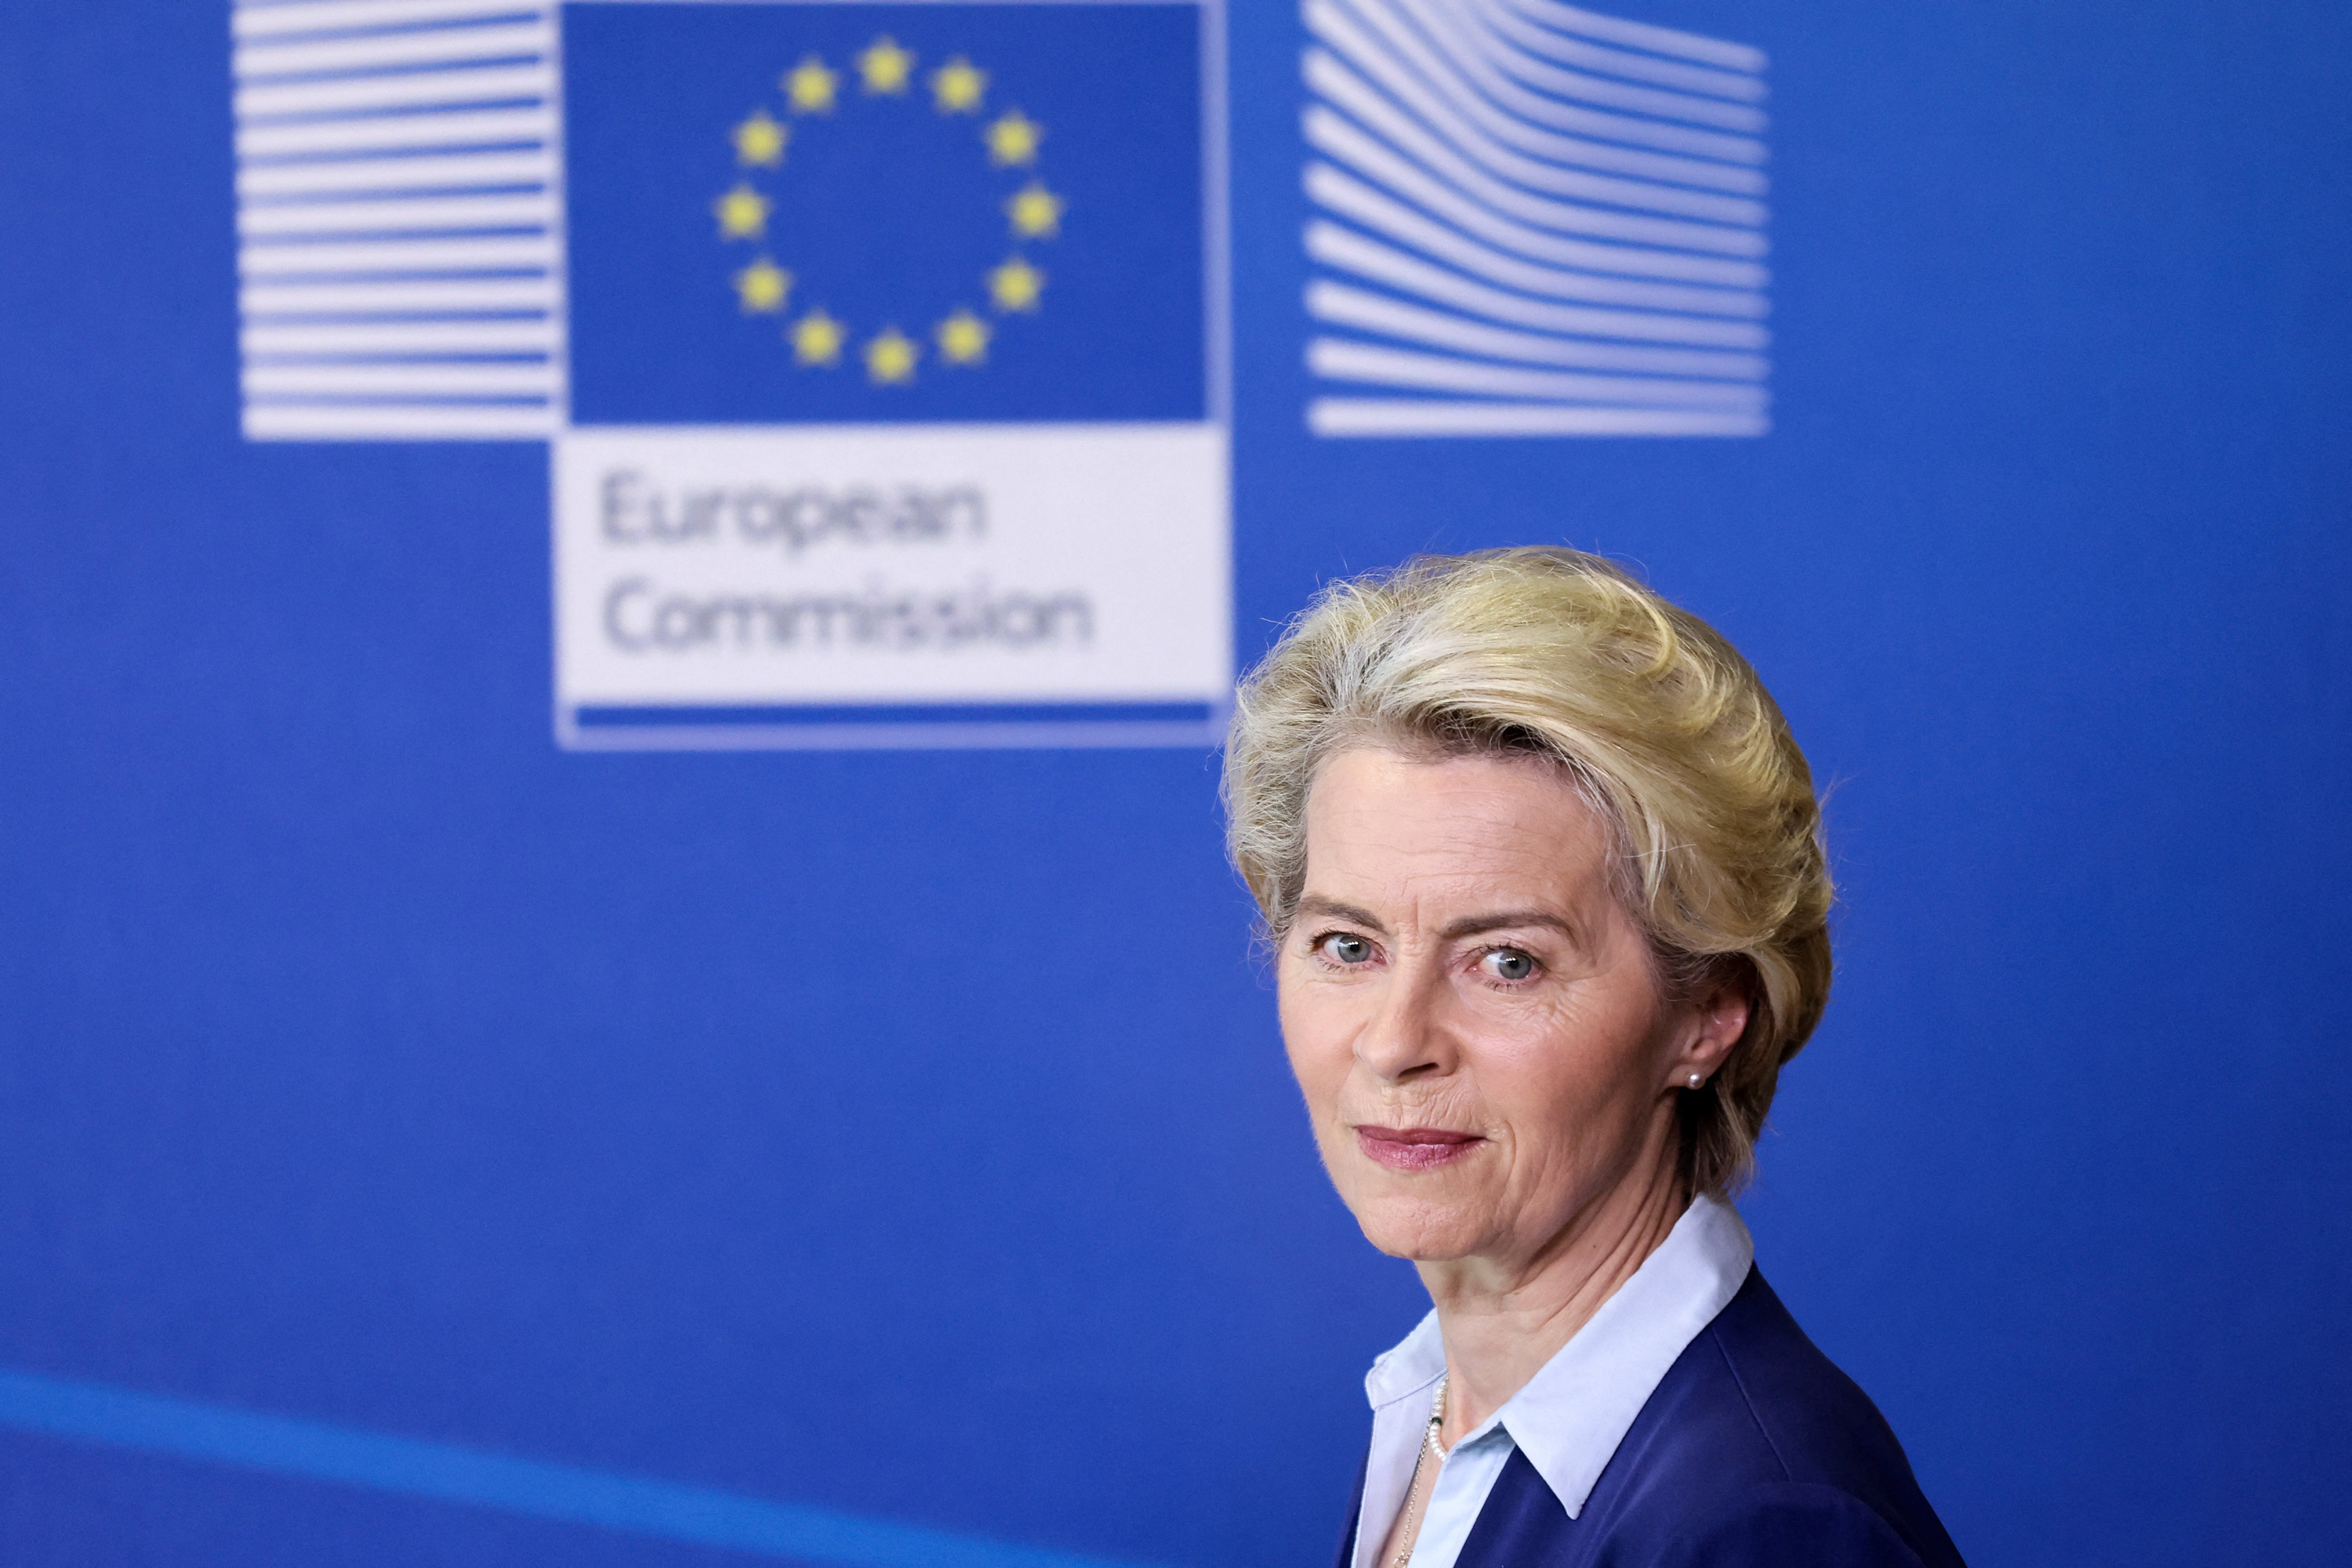 EU President Ursula von der Leyen arrives for a press conference at the EU headquarters in Brussels, on Tuesday.